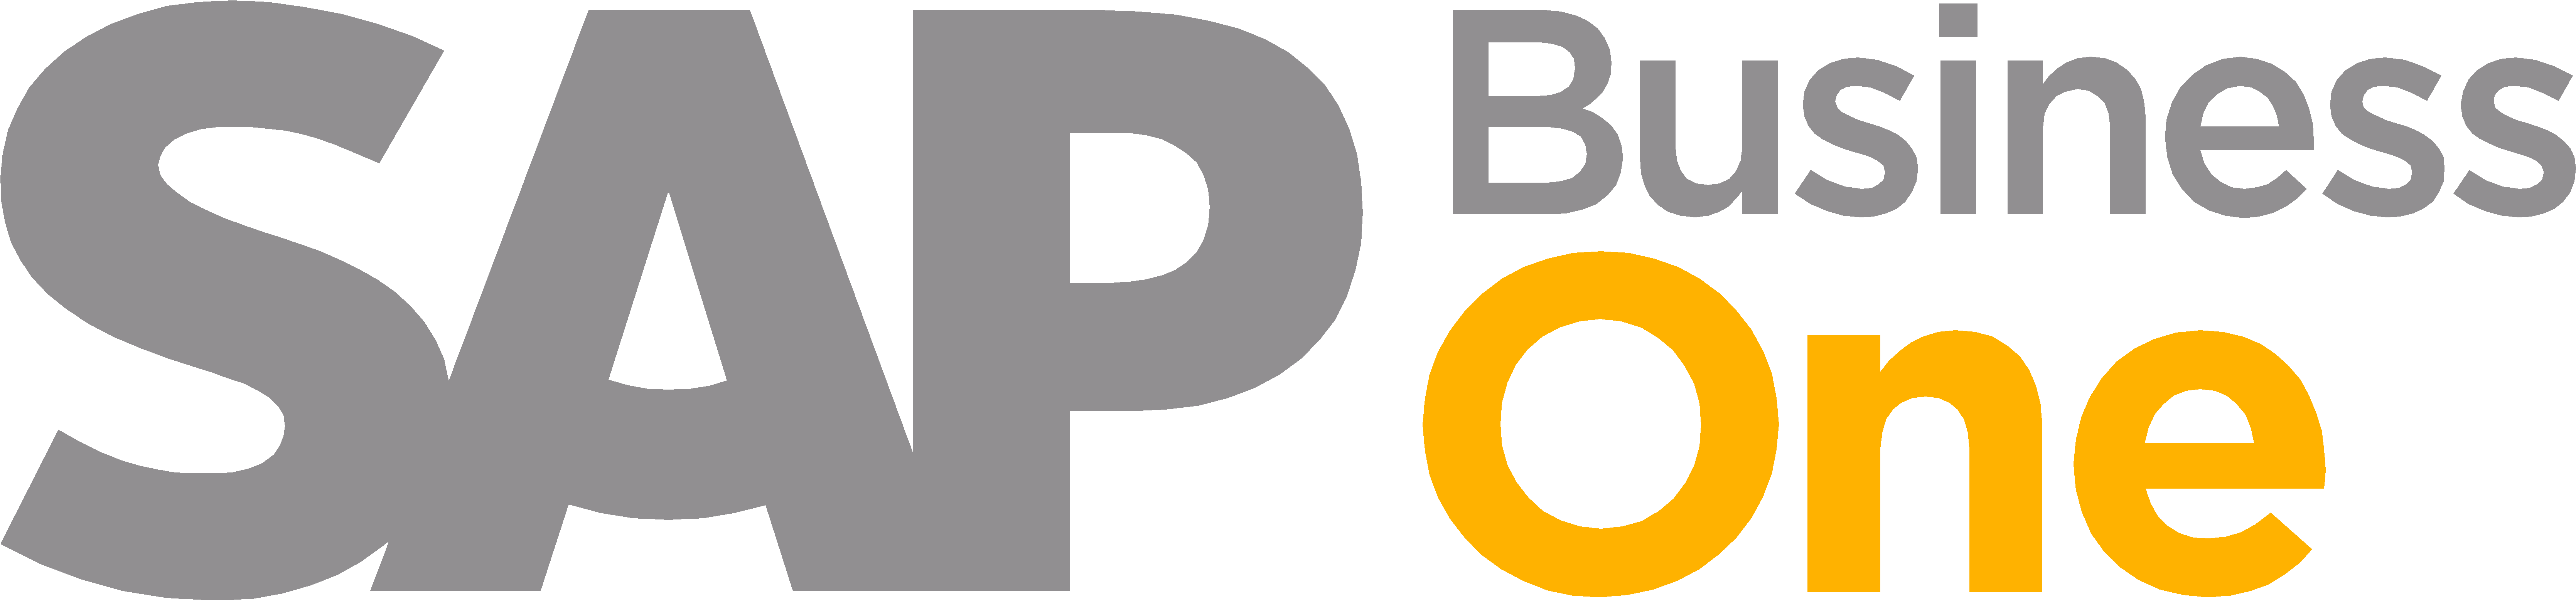 Sap Business One Jylek - Sap Business One Logo Png (6692x1574), Png Download